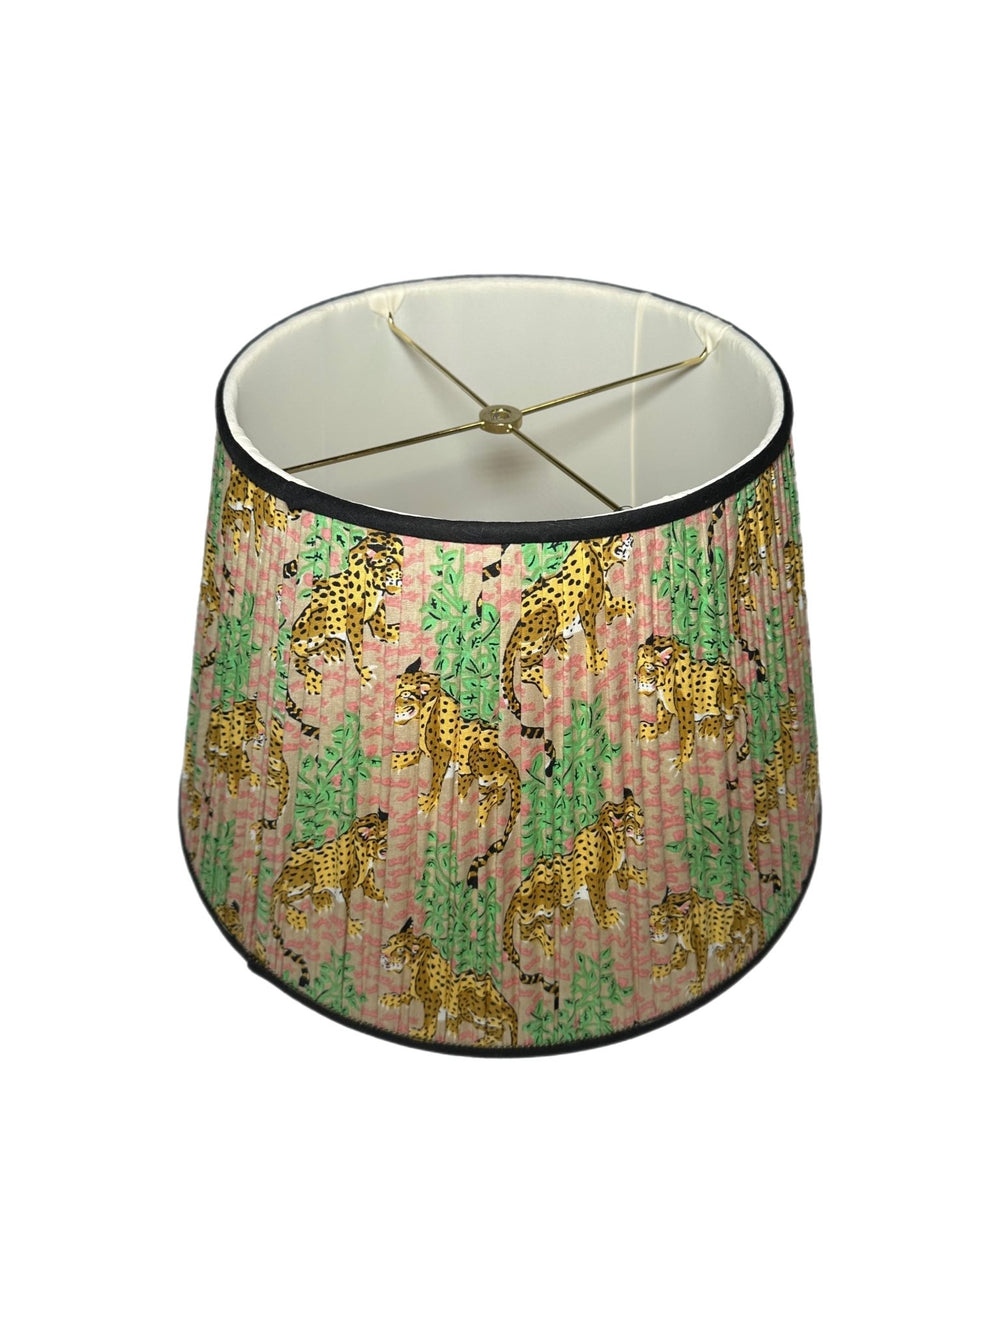 18" Gathered Leopard Print, Black Trim - (2) in stock - Lux Lamp Shades